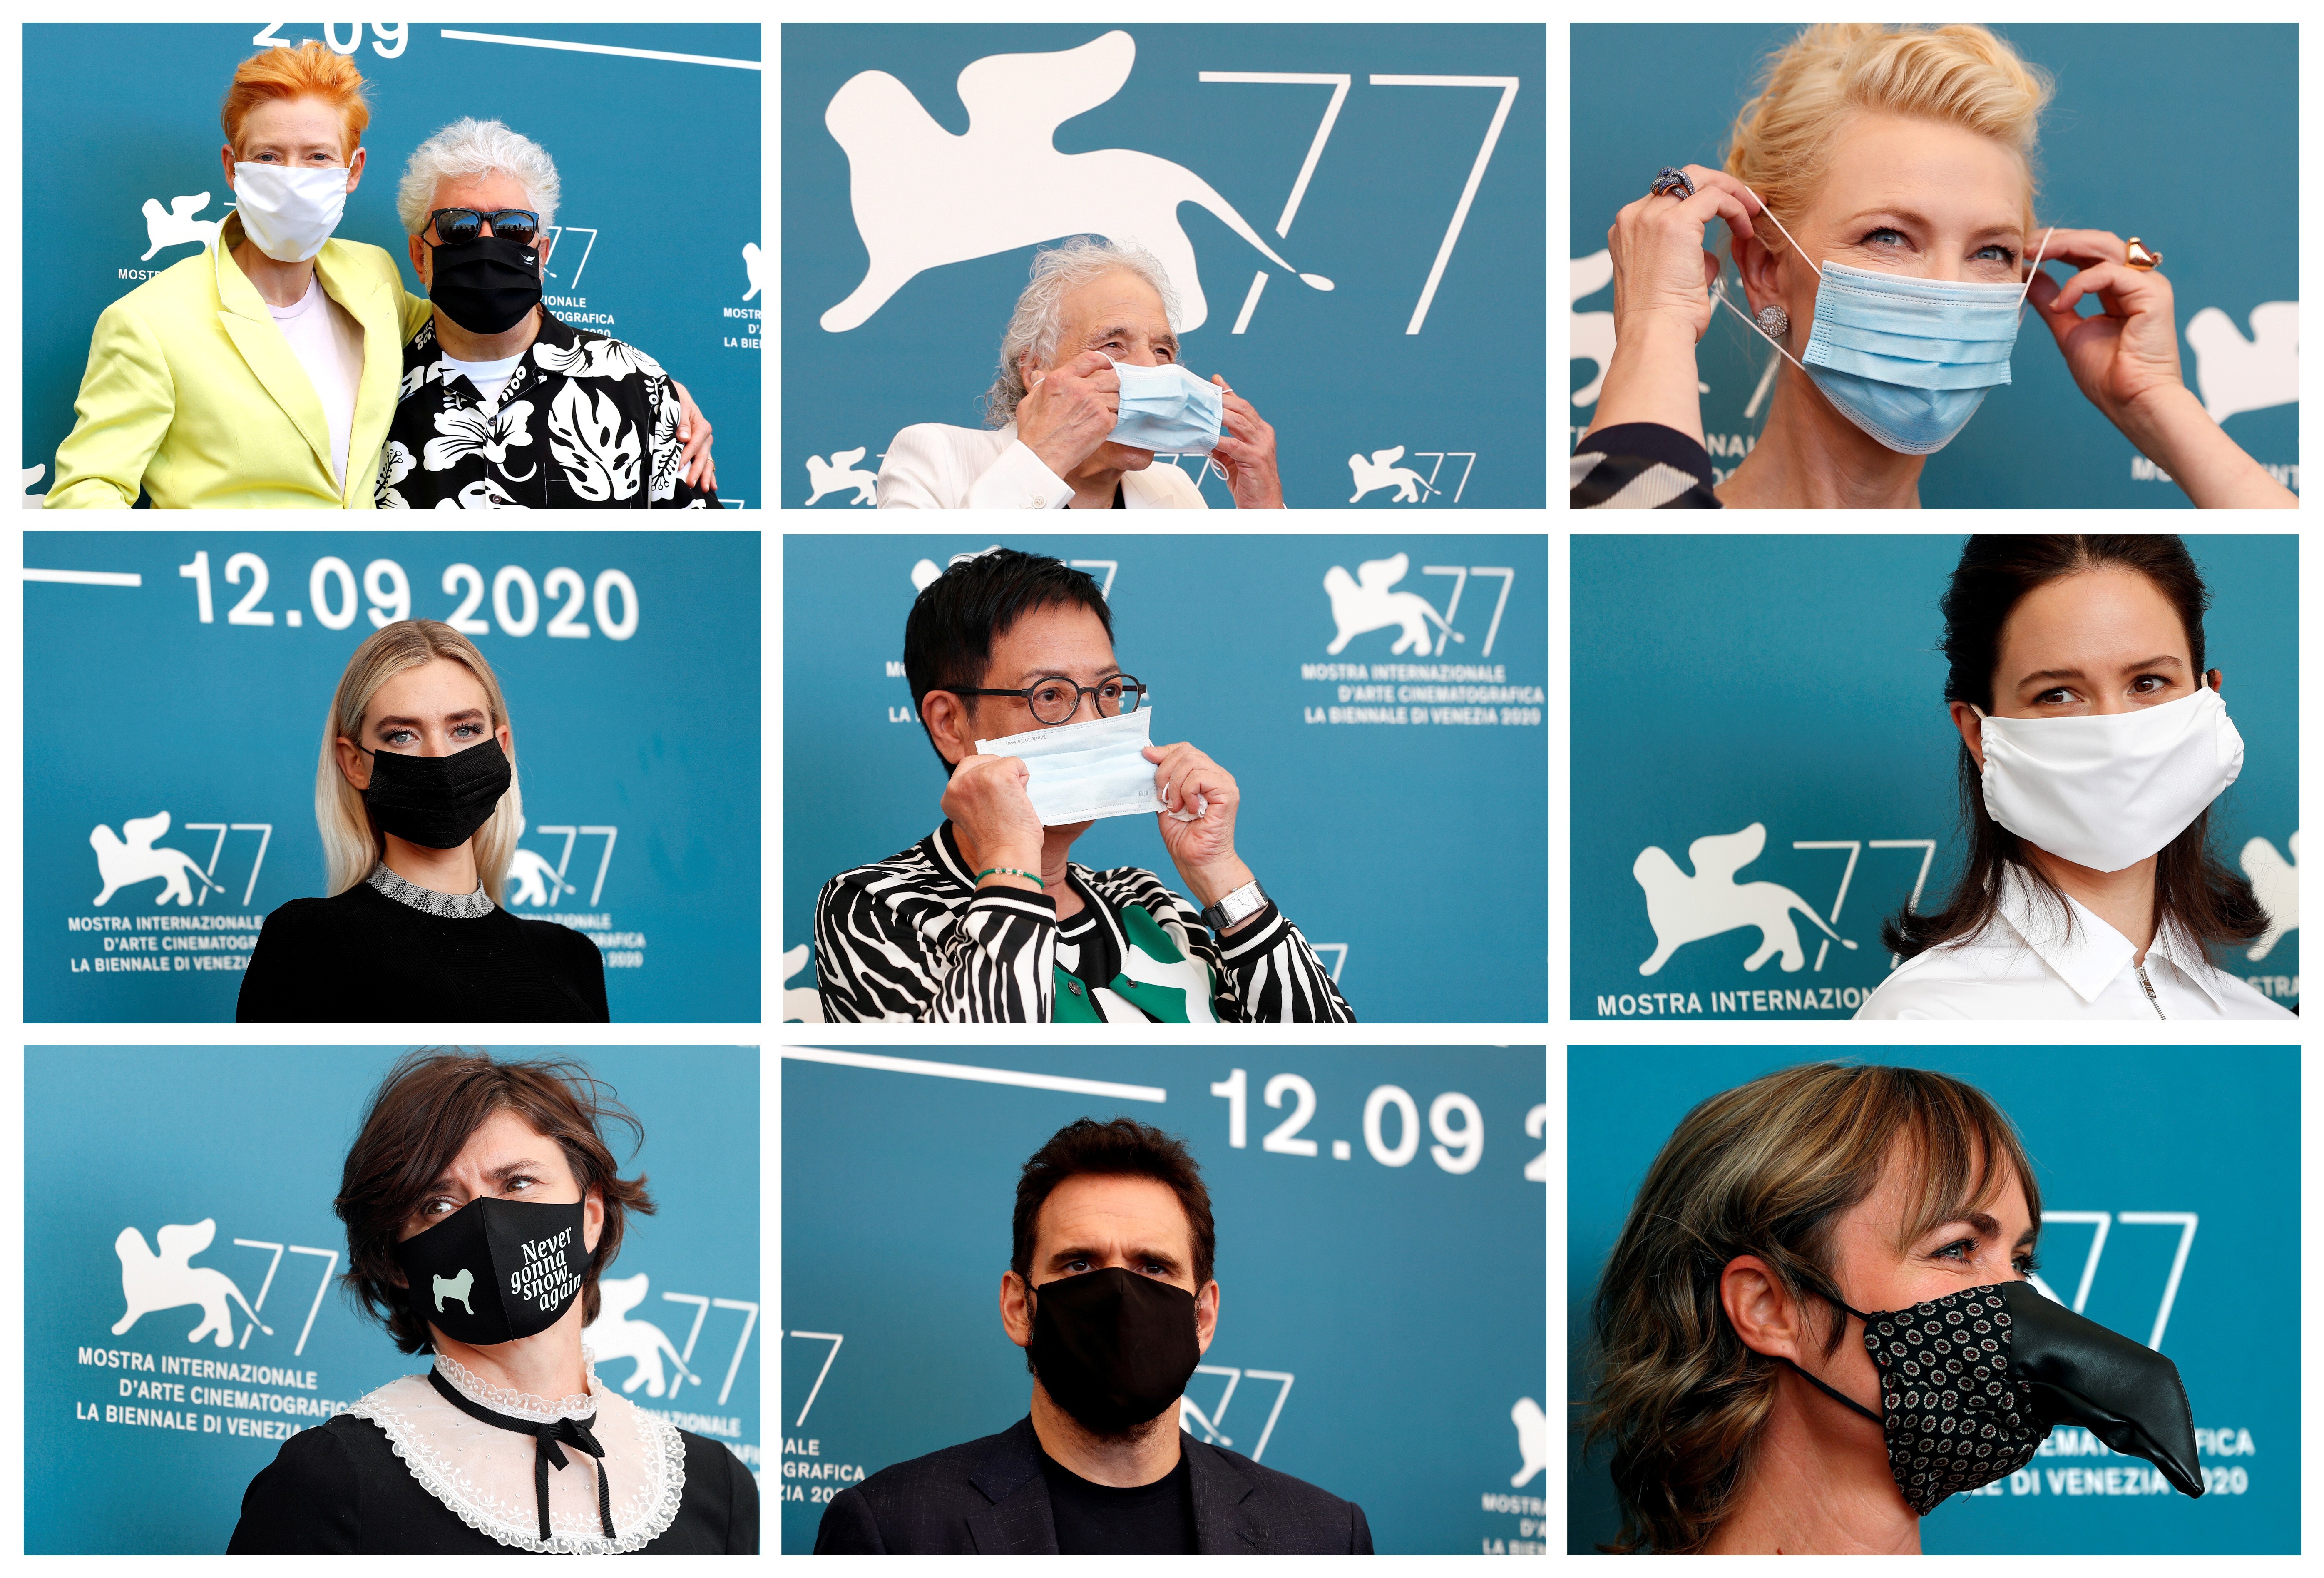 The 77th Venice International Film Festival featured safety measures like required face masks; director Pedro Almodóvar, actor Tilda Swinton, director Abel Ferrara, president of the jury Cate Blanchett, actor Vanessa Kirby, director Ann Hui, actor Katherine Waterston, director Malgorzata Szumowska, member of the jury Matt Dillon and actor Radha Mitchell don masks while posting at the festival. Photos: Reuters